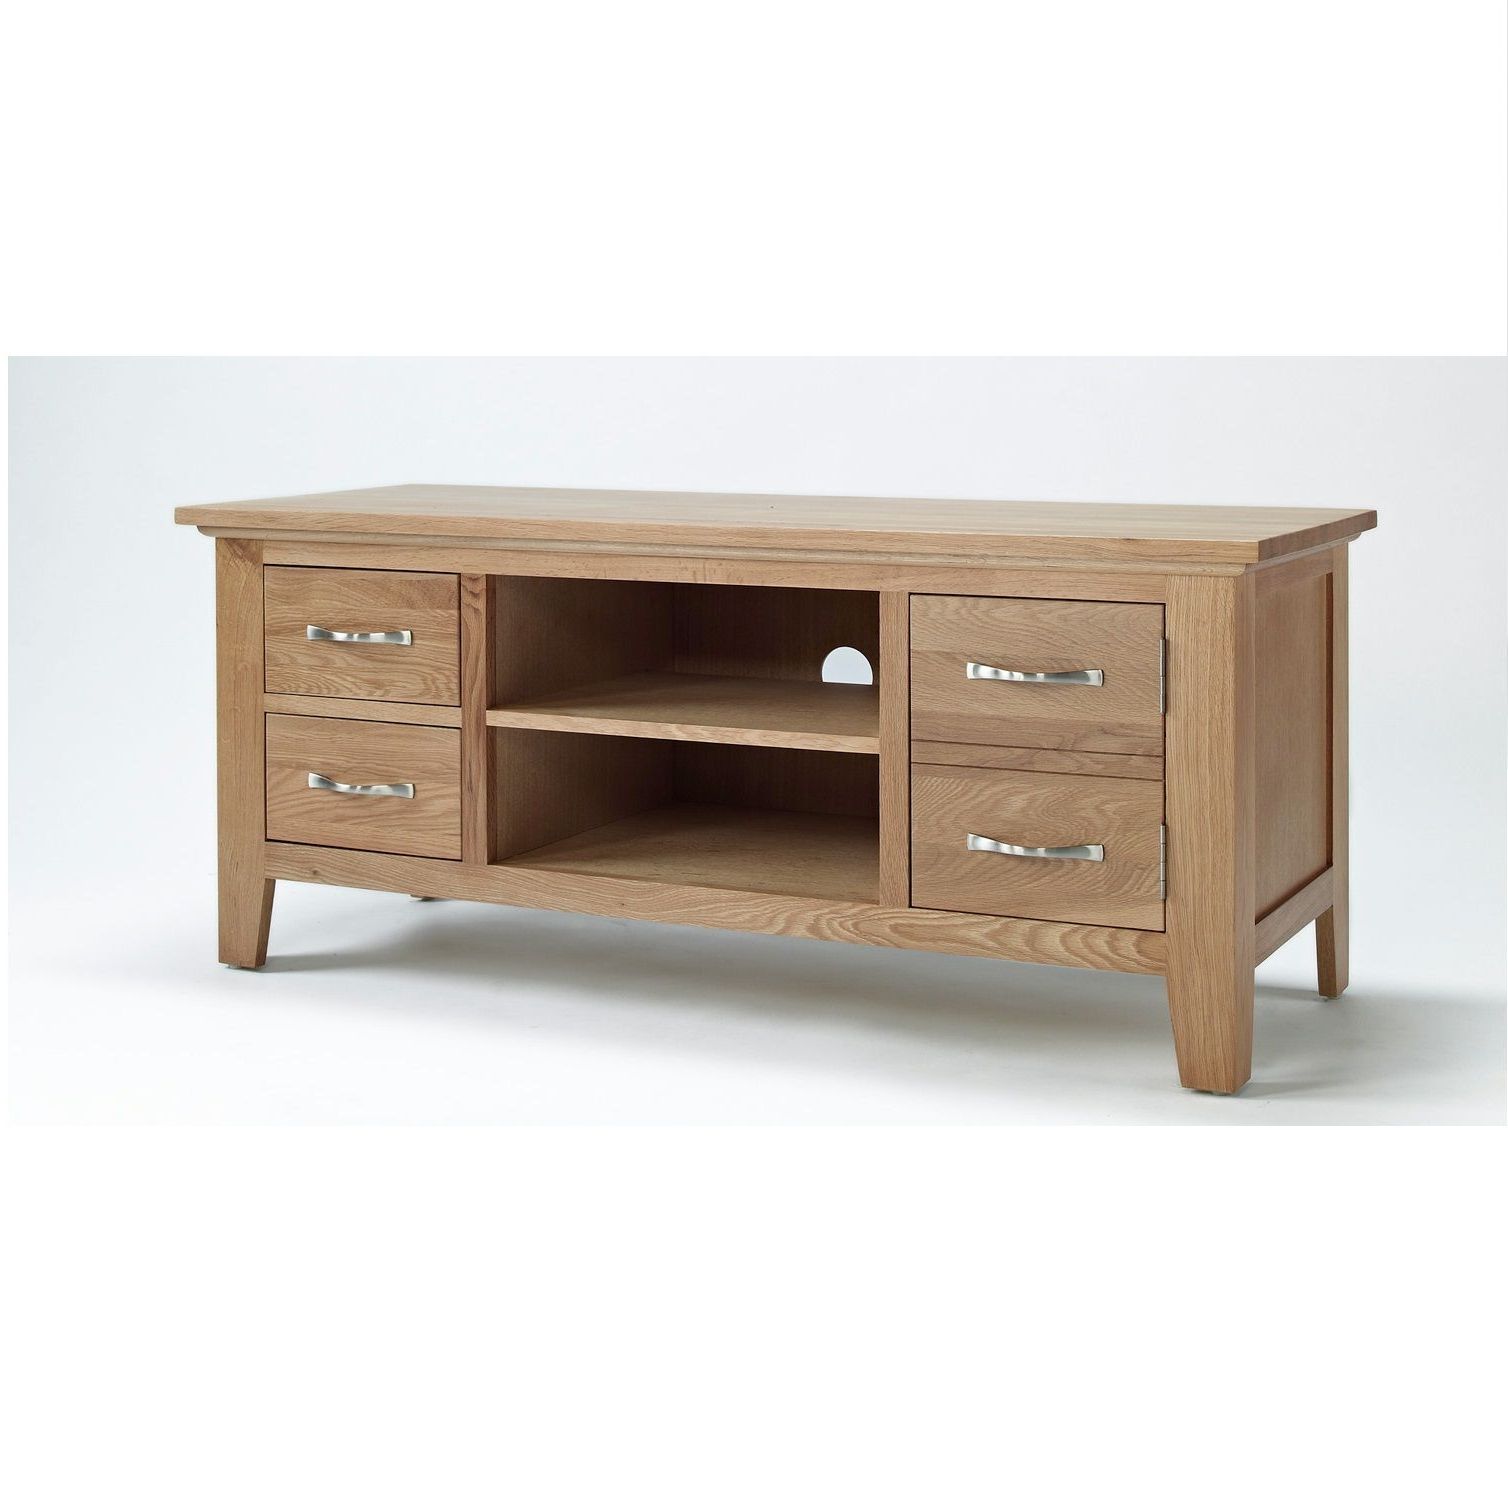 Well Liked Embodying Contemporary Sophistication, The Sherwood Oak Tv Unit Is A Regarding Contemporary Oak Tv Cabinets (View 10 of 20)